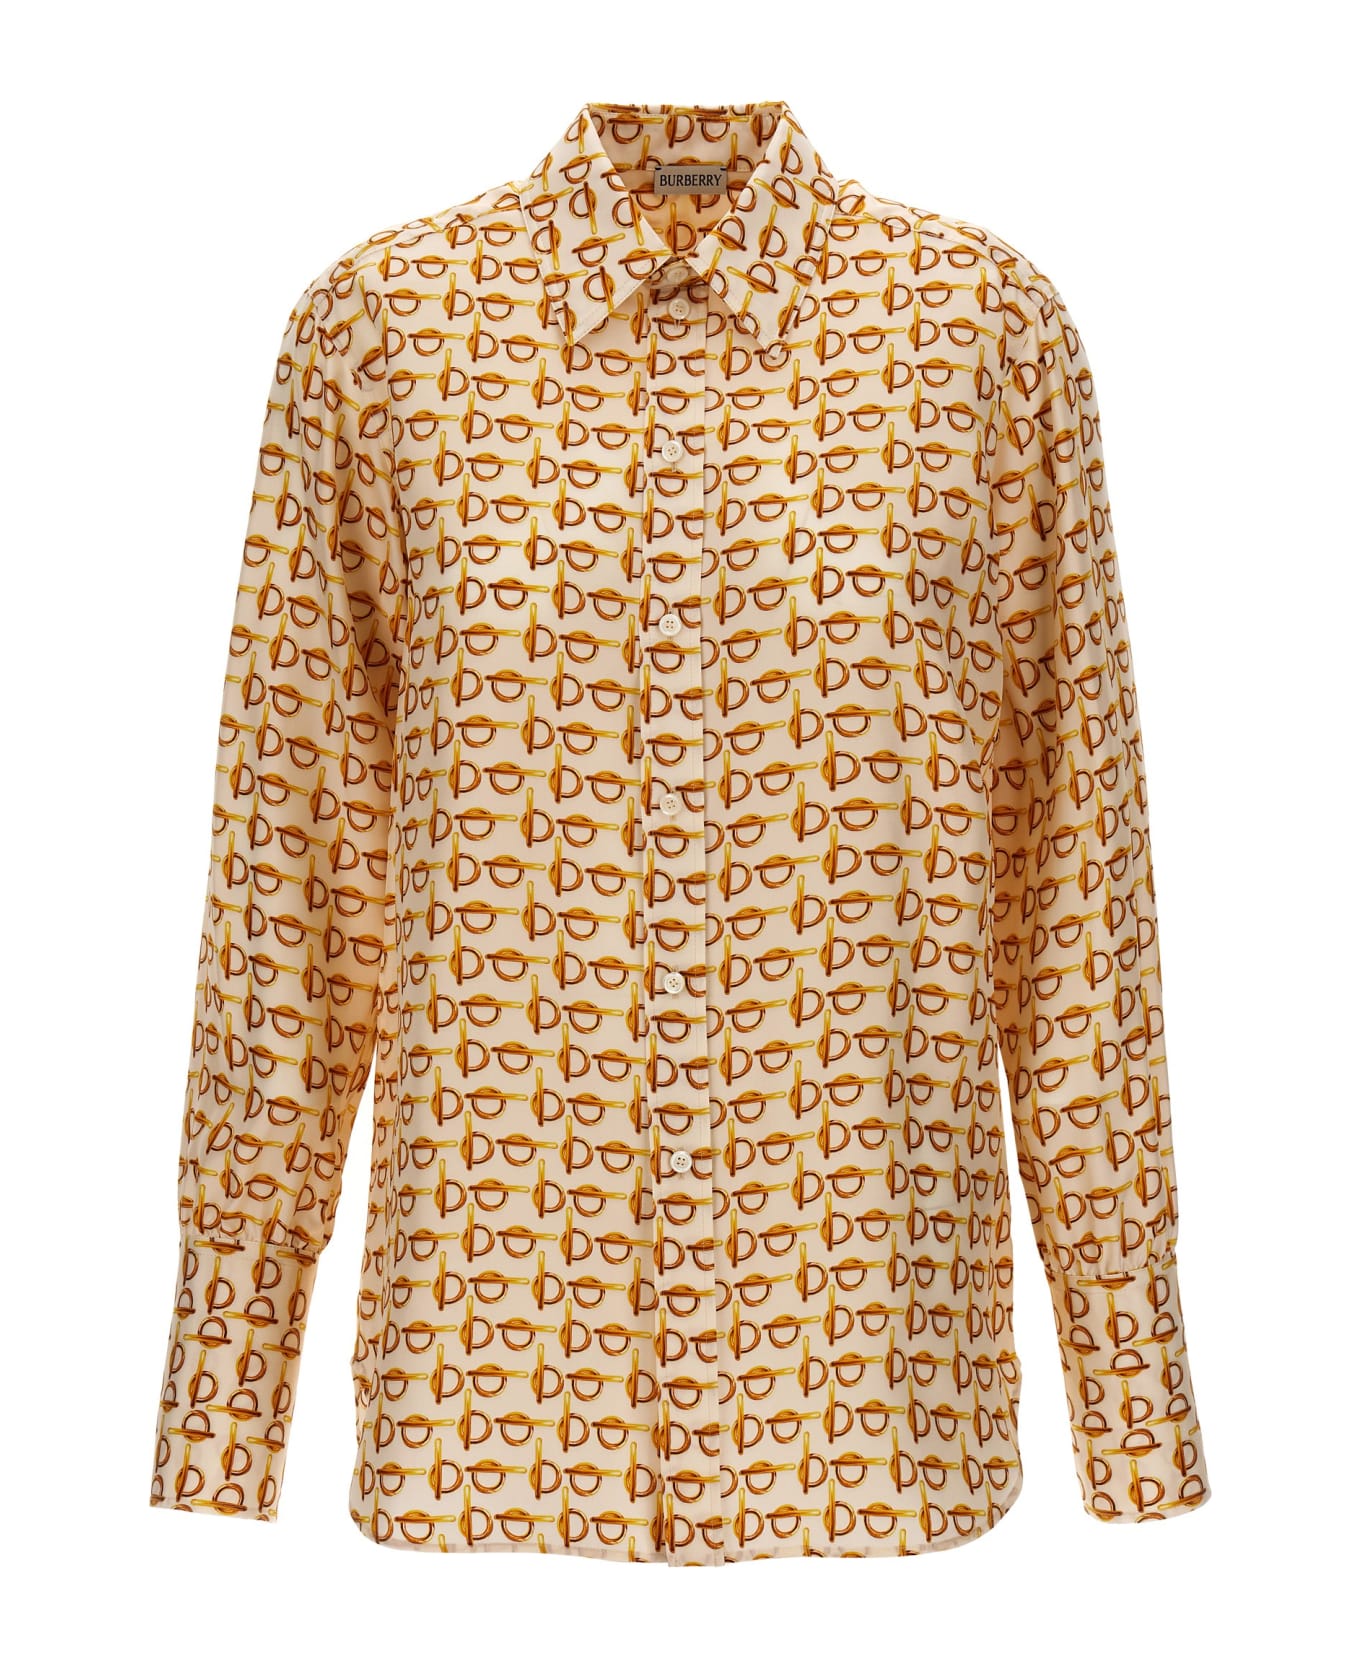 burberry with 'b' Shirt - Multicolor